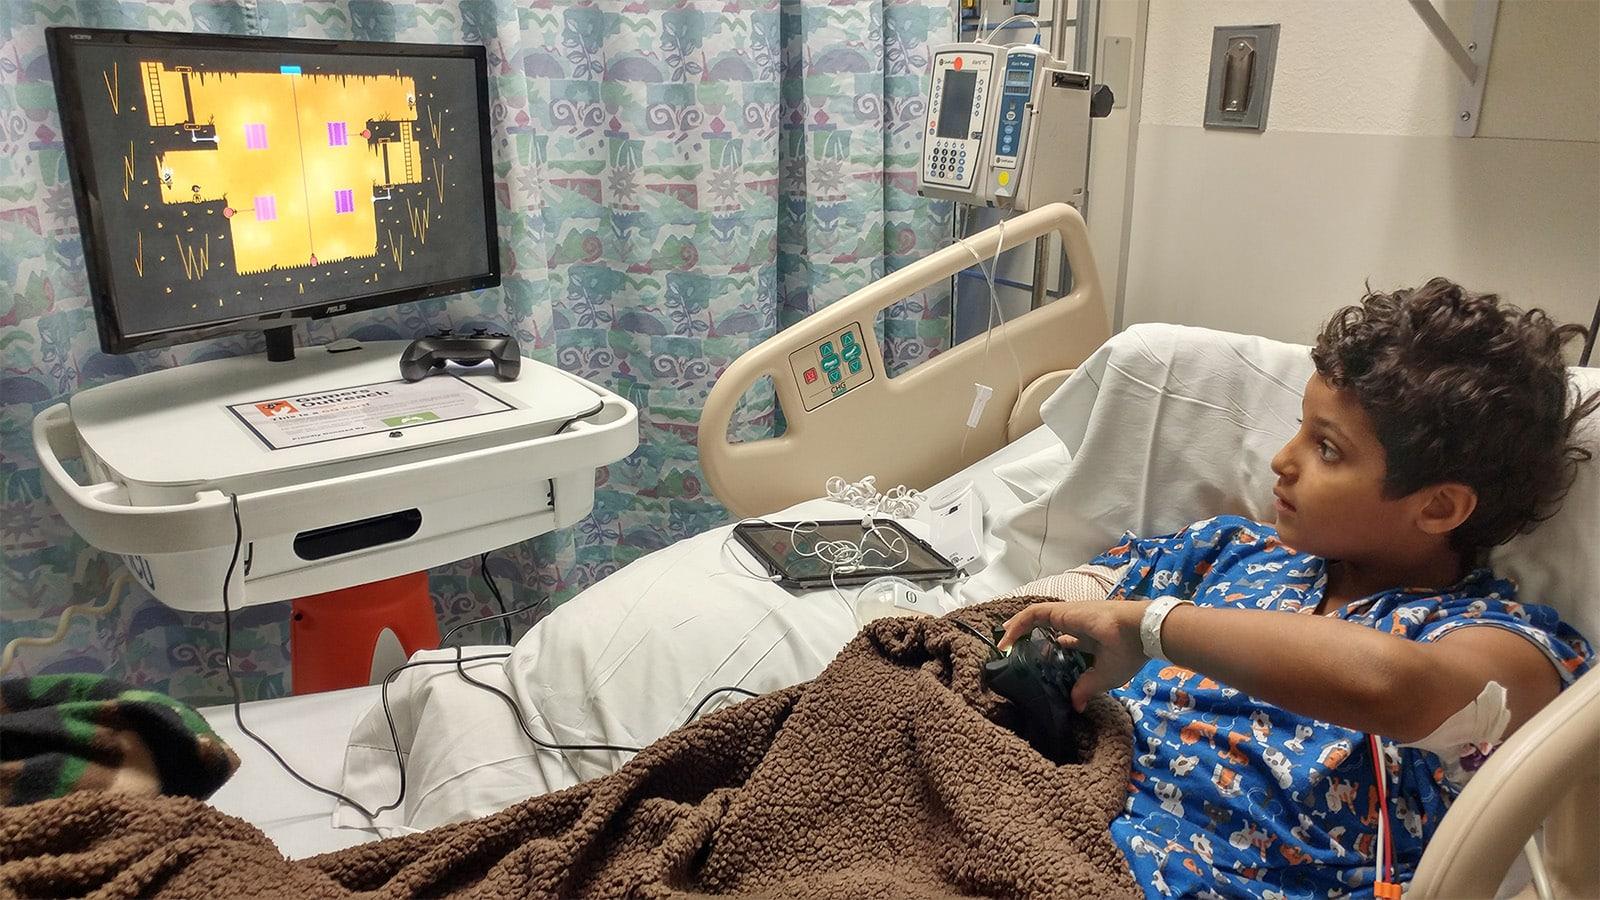 gamers outreach patient playing games on go kart